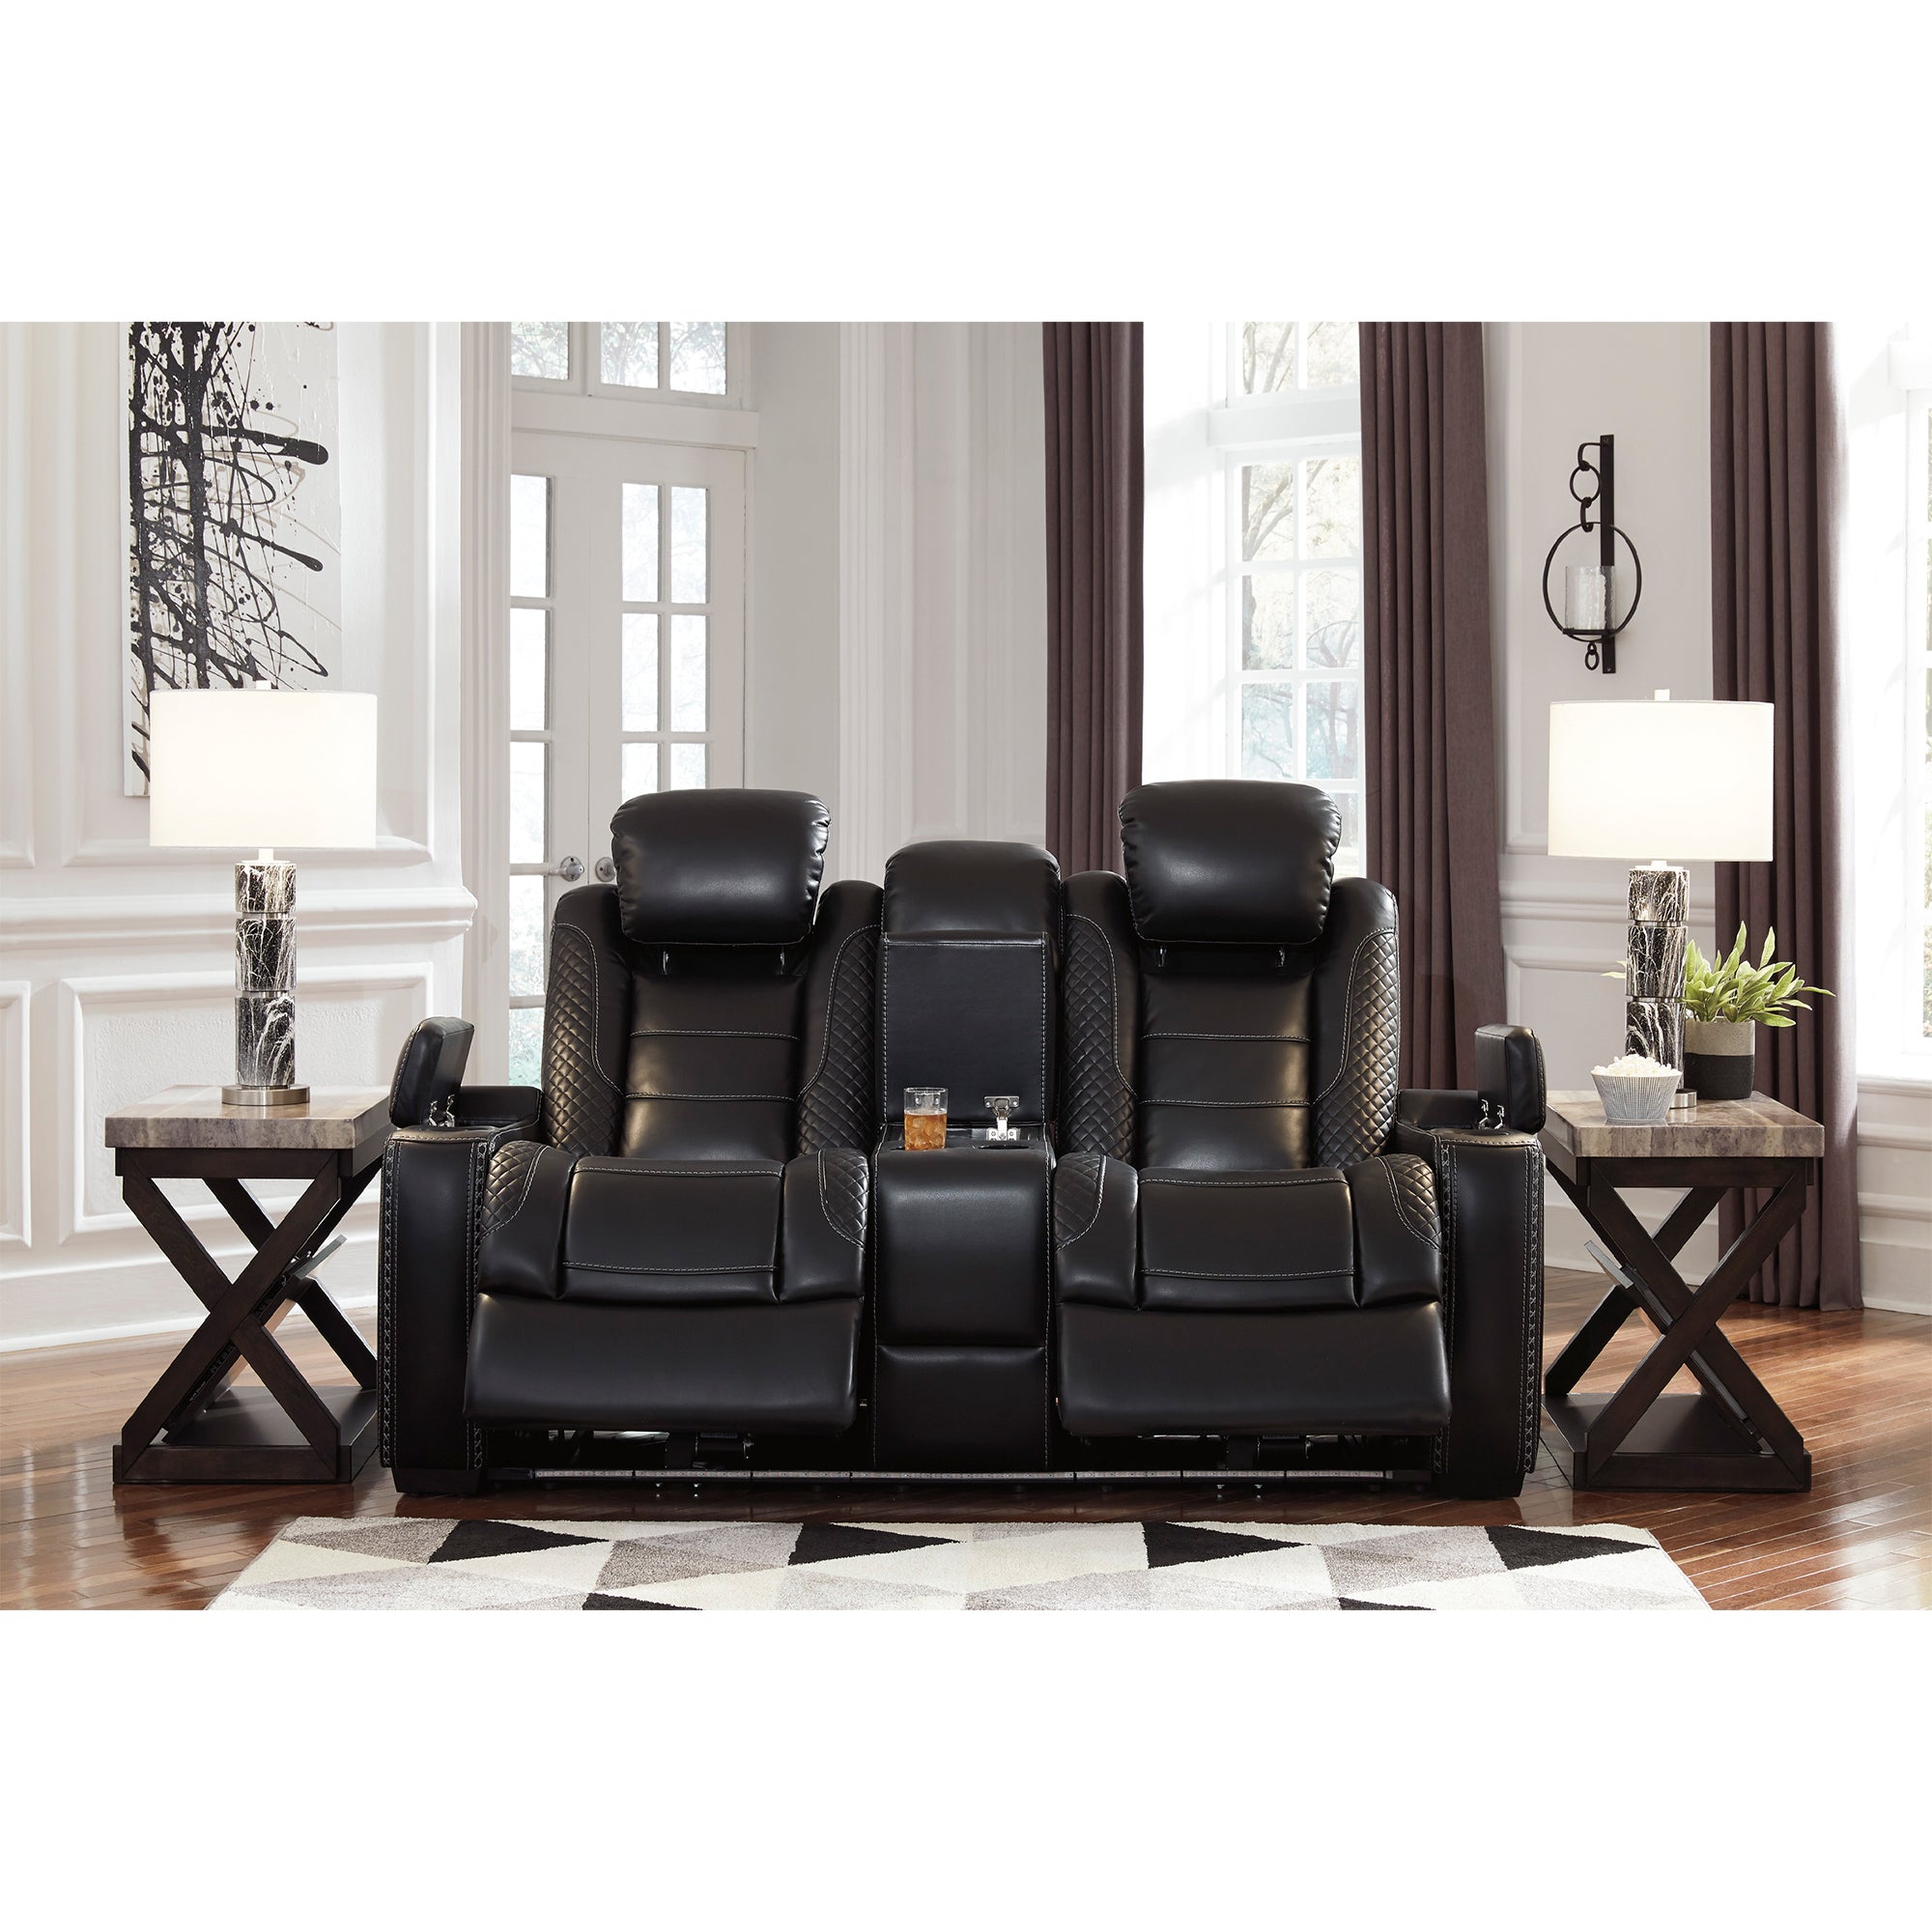 Party Time Dual Power Reclining Loveseat with Console